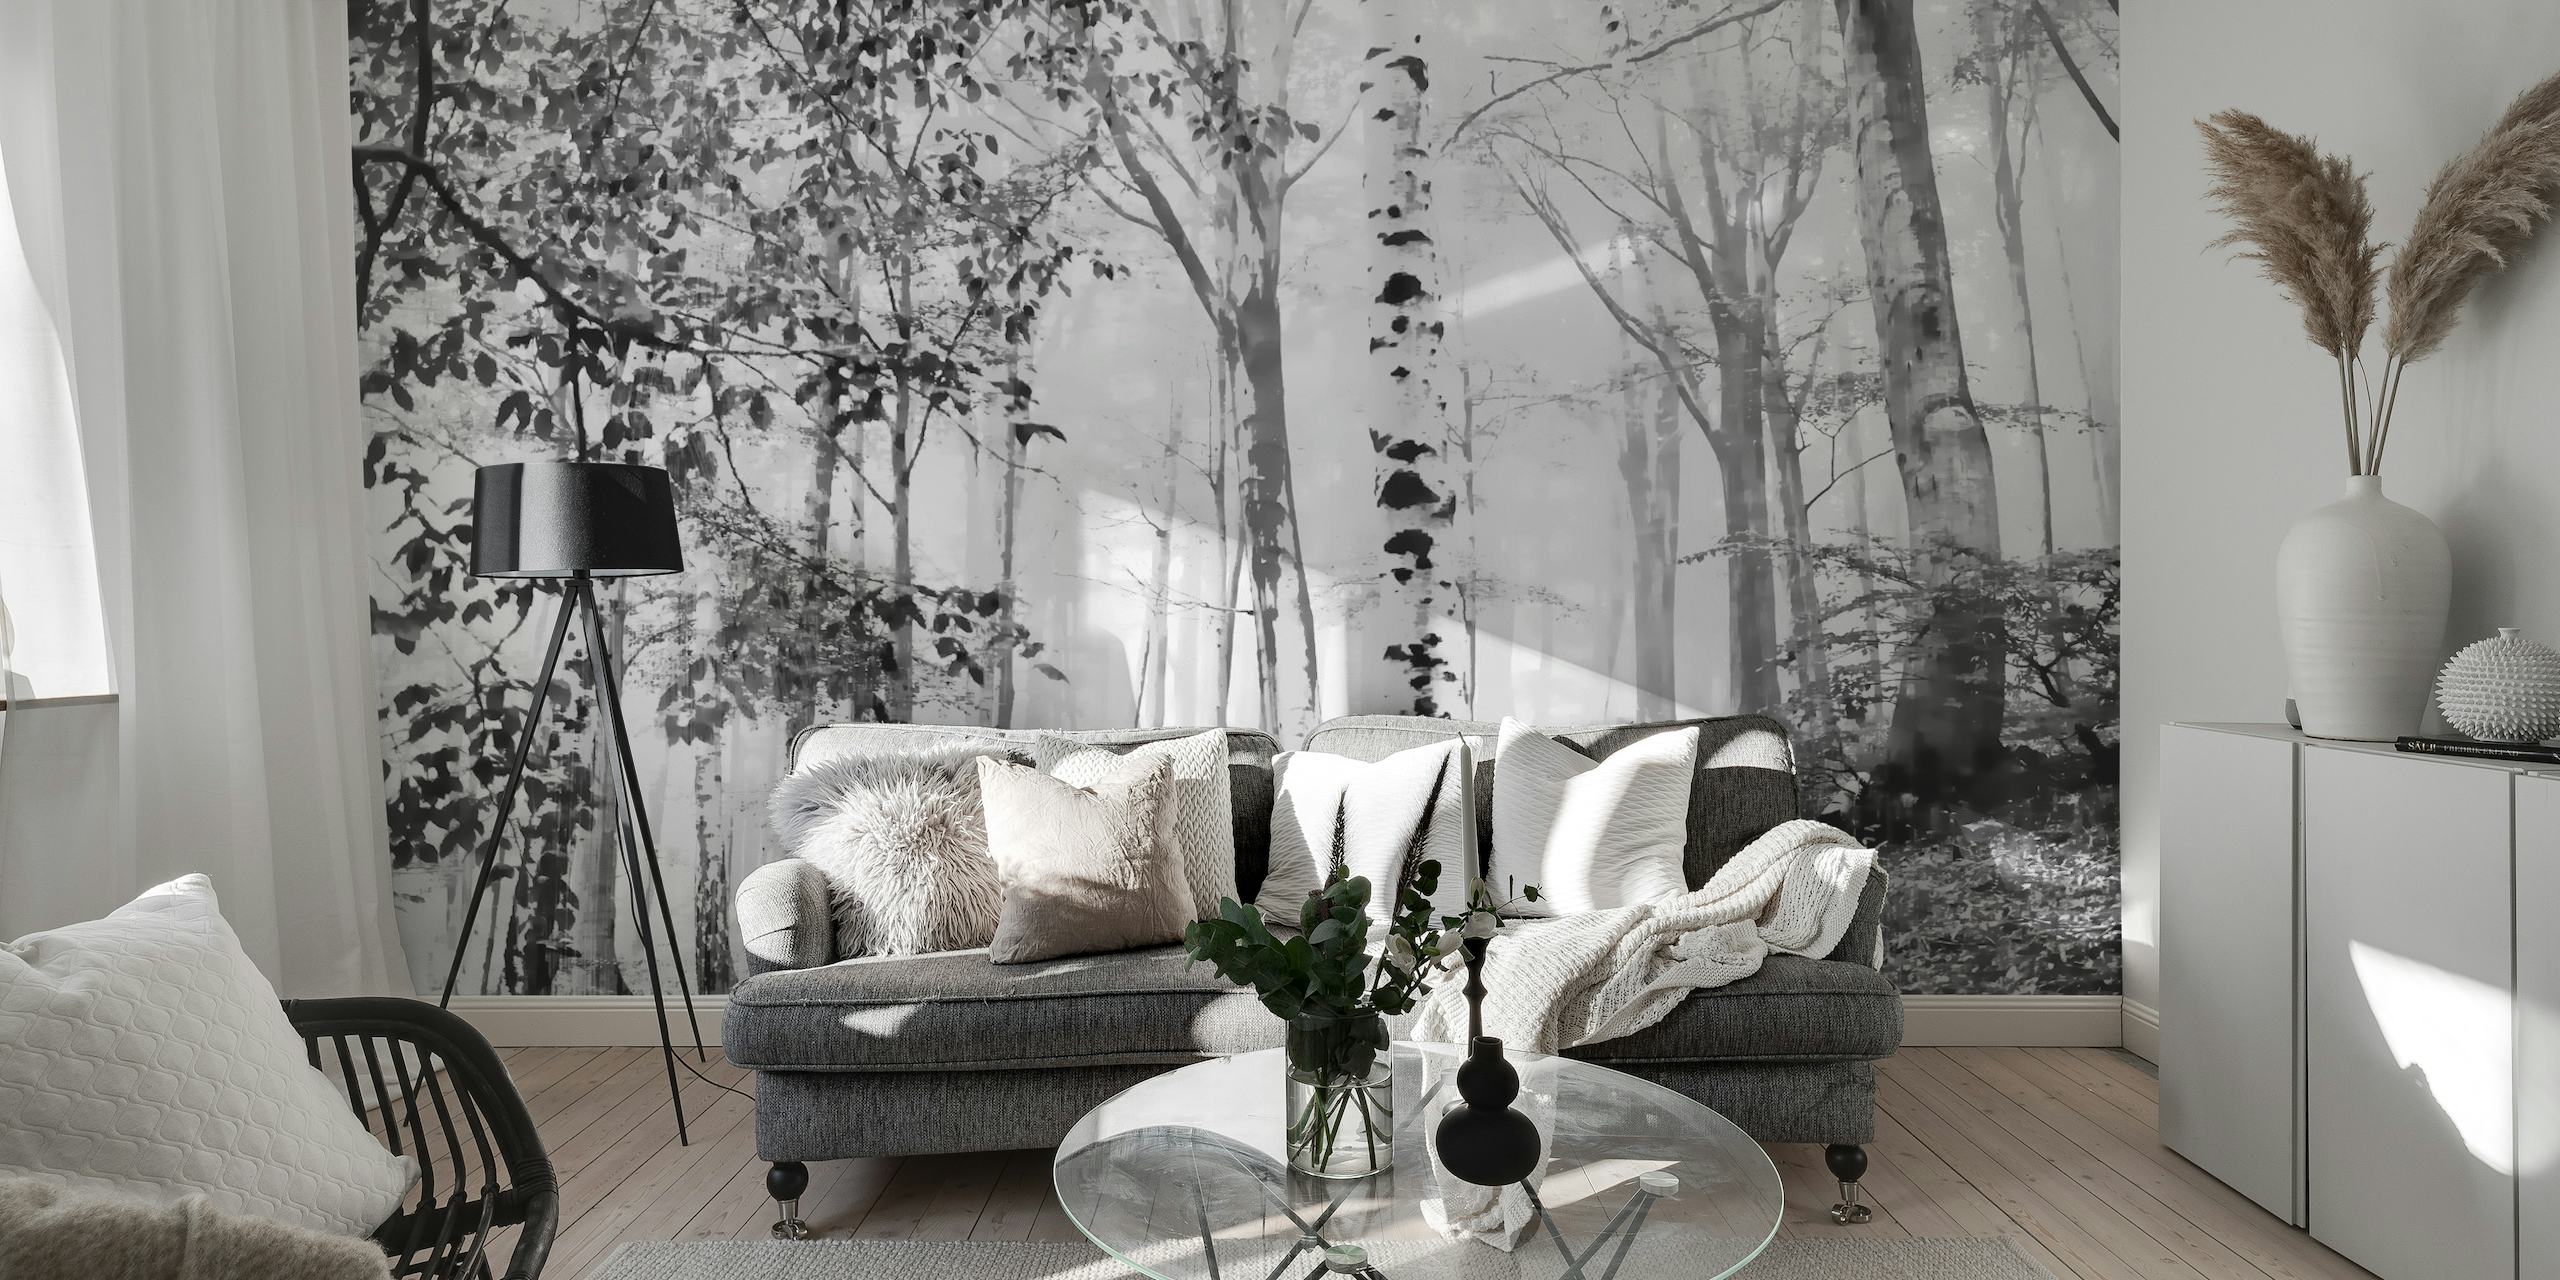 Misty birch forest wall mural in black and white, creating a serene woodland scene for interior decor